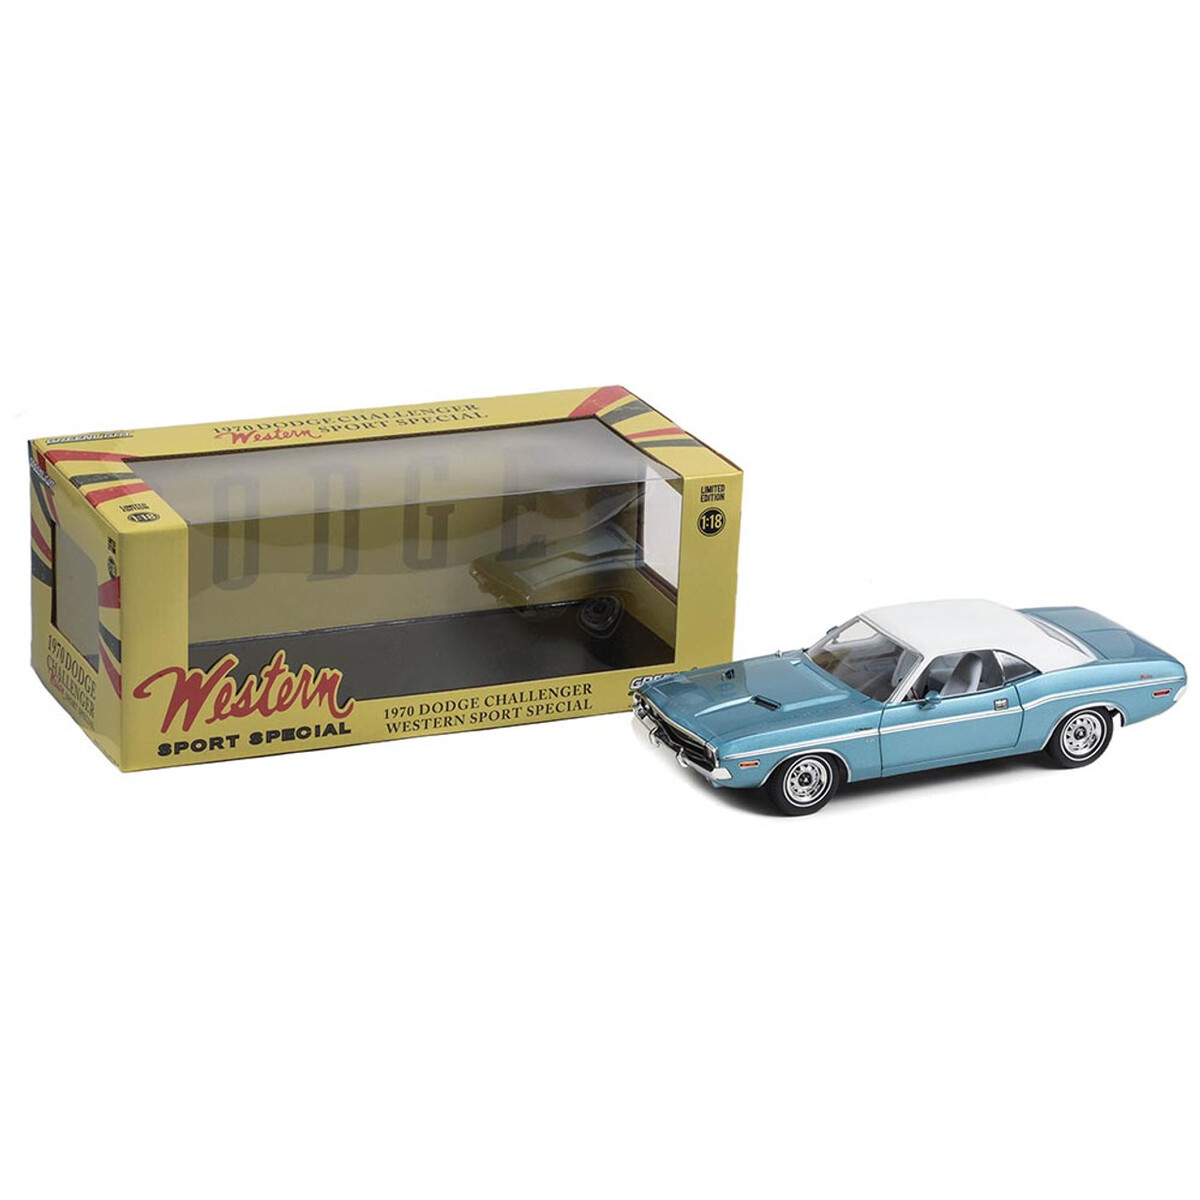 Greenlight 1/18 1970 Dodge Challenger - Western Sport Special - Light Blue Poly with Vinyl Roof and White Interior 13644 - Thumbnail